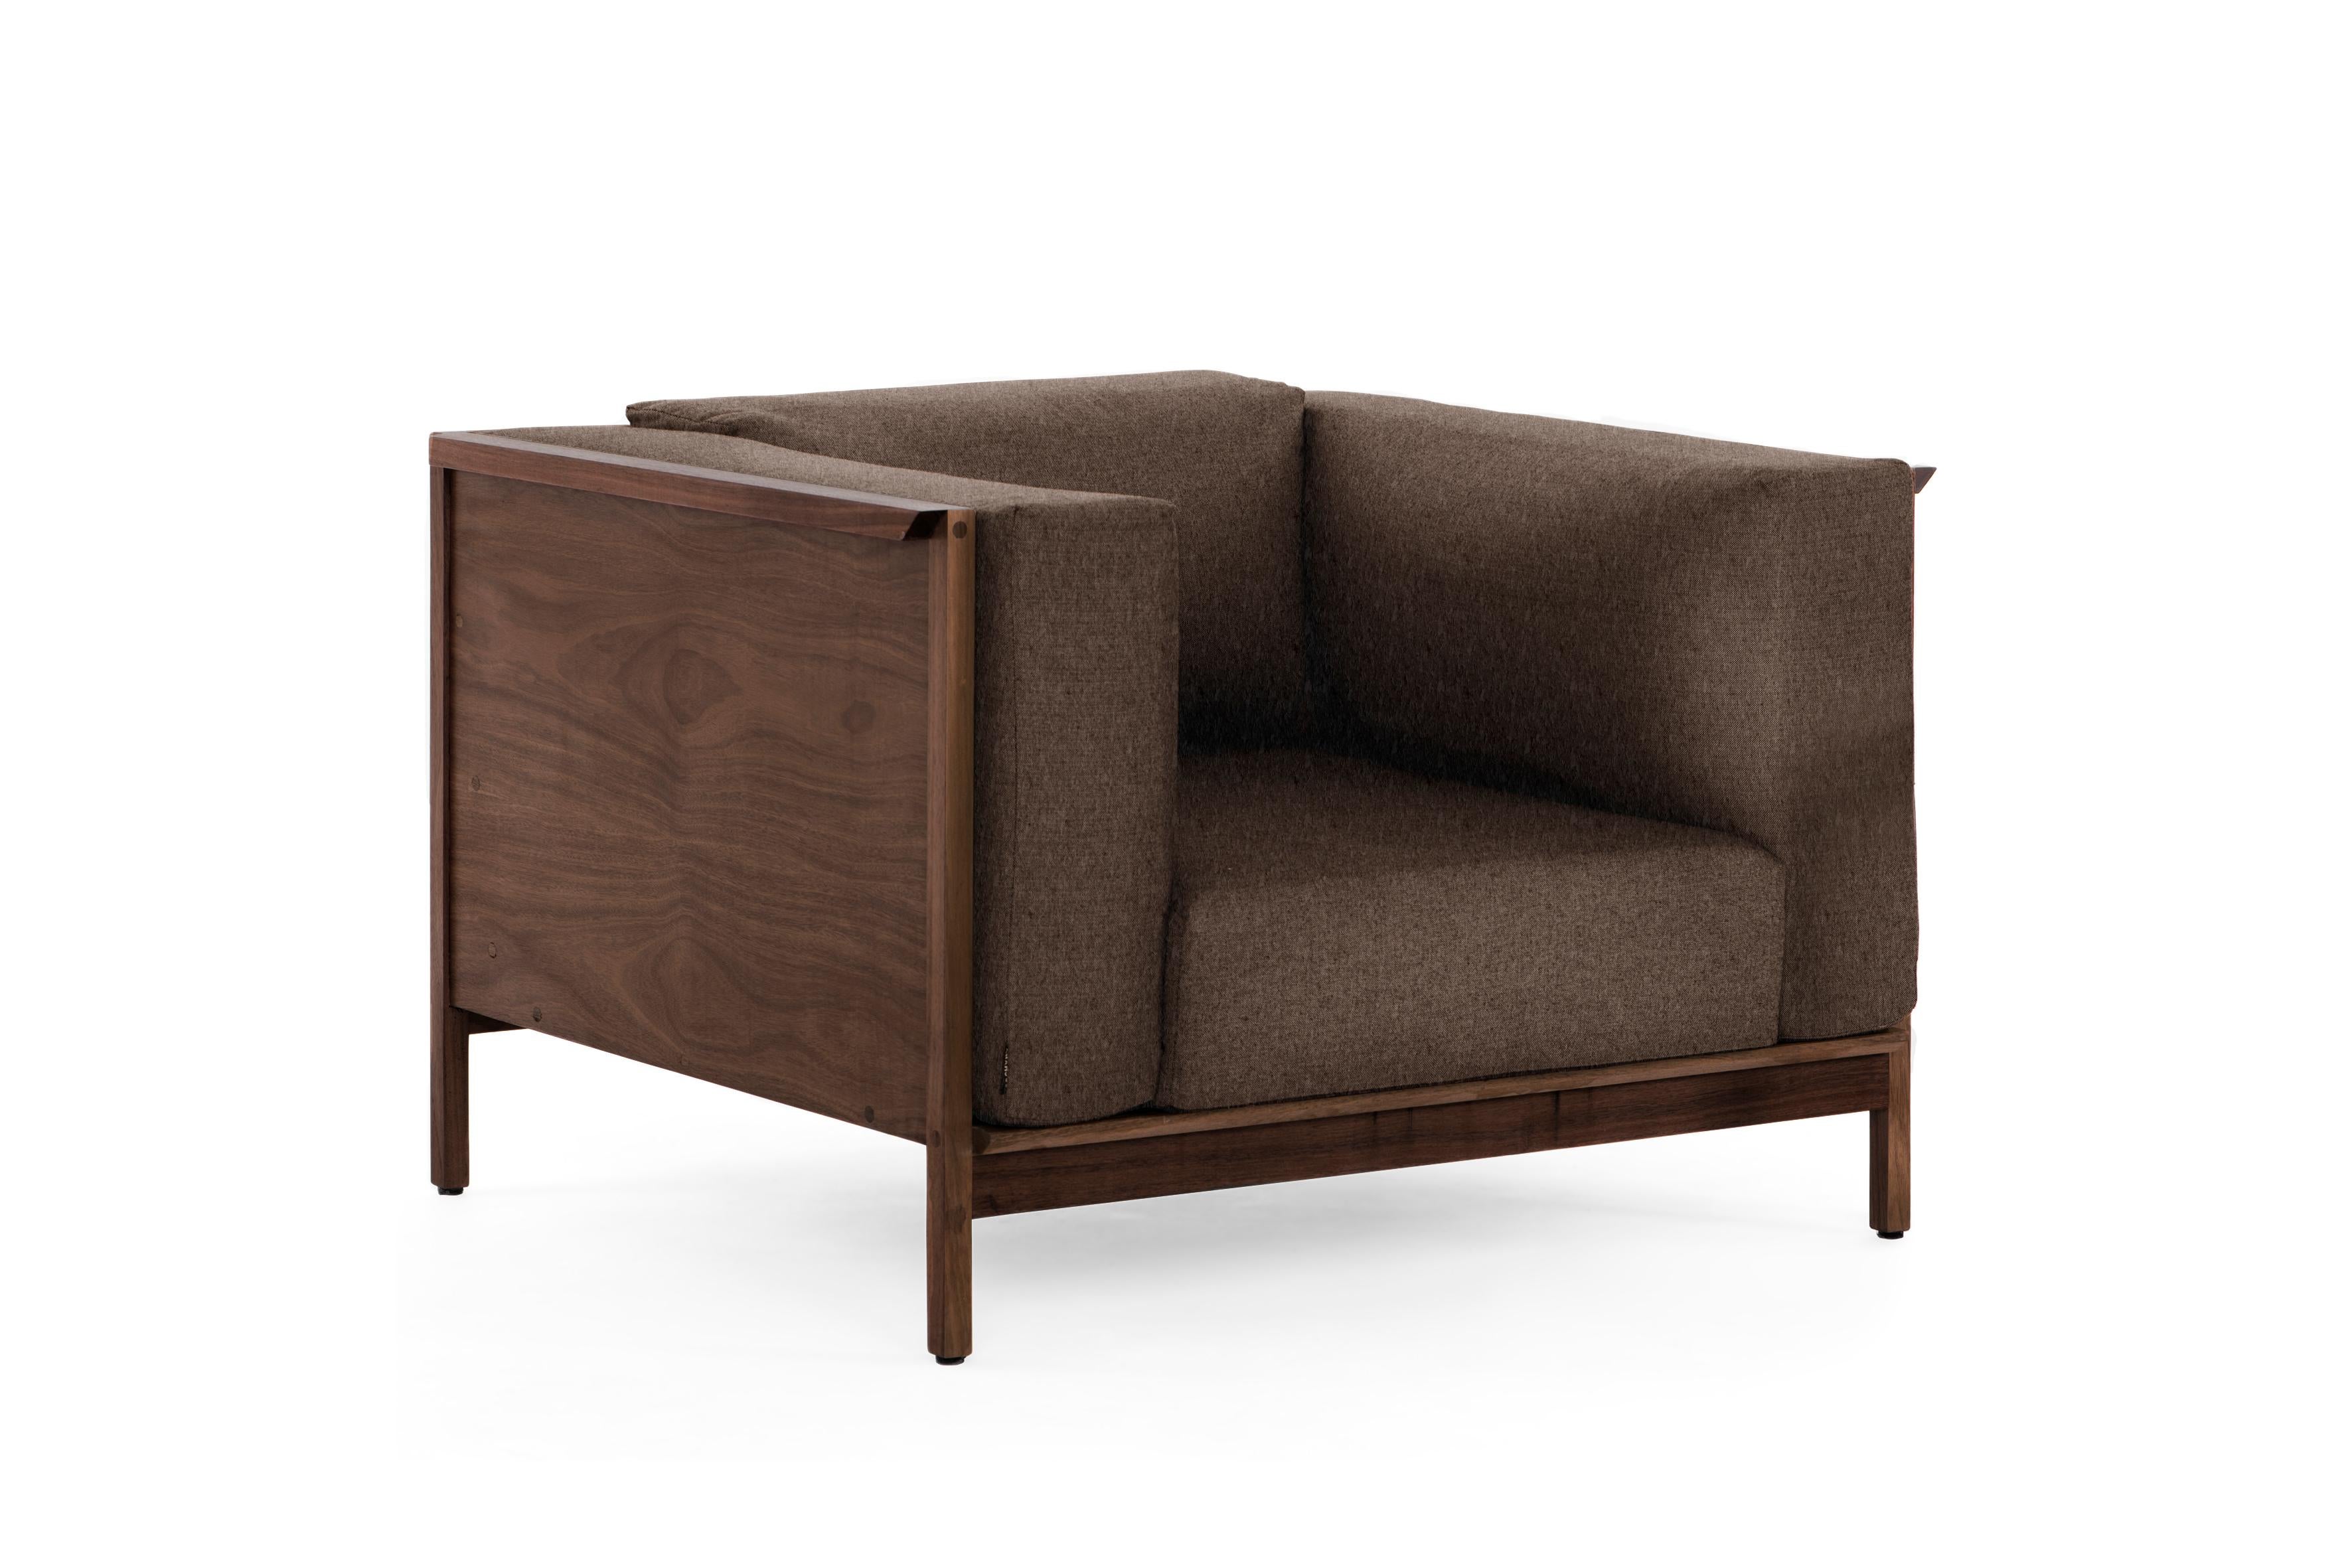 Individual Confort, Mexican Contemporary Armchair by Emiliano Molina for Cuchara For Sale 2